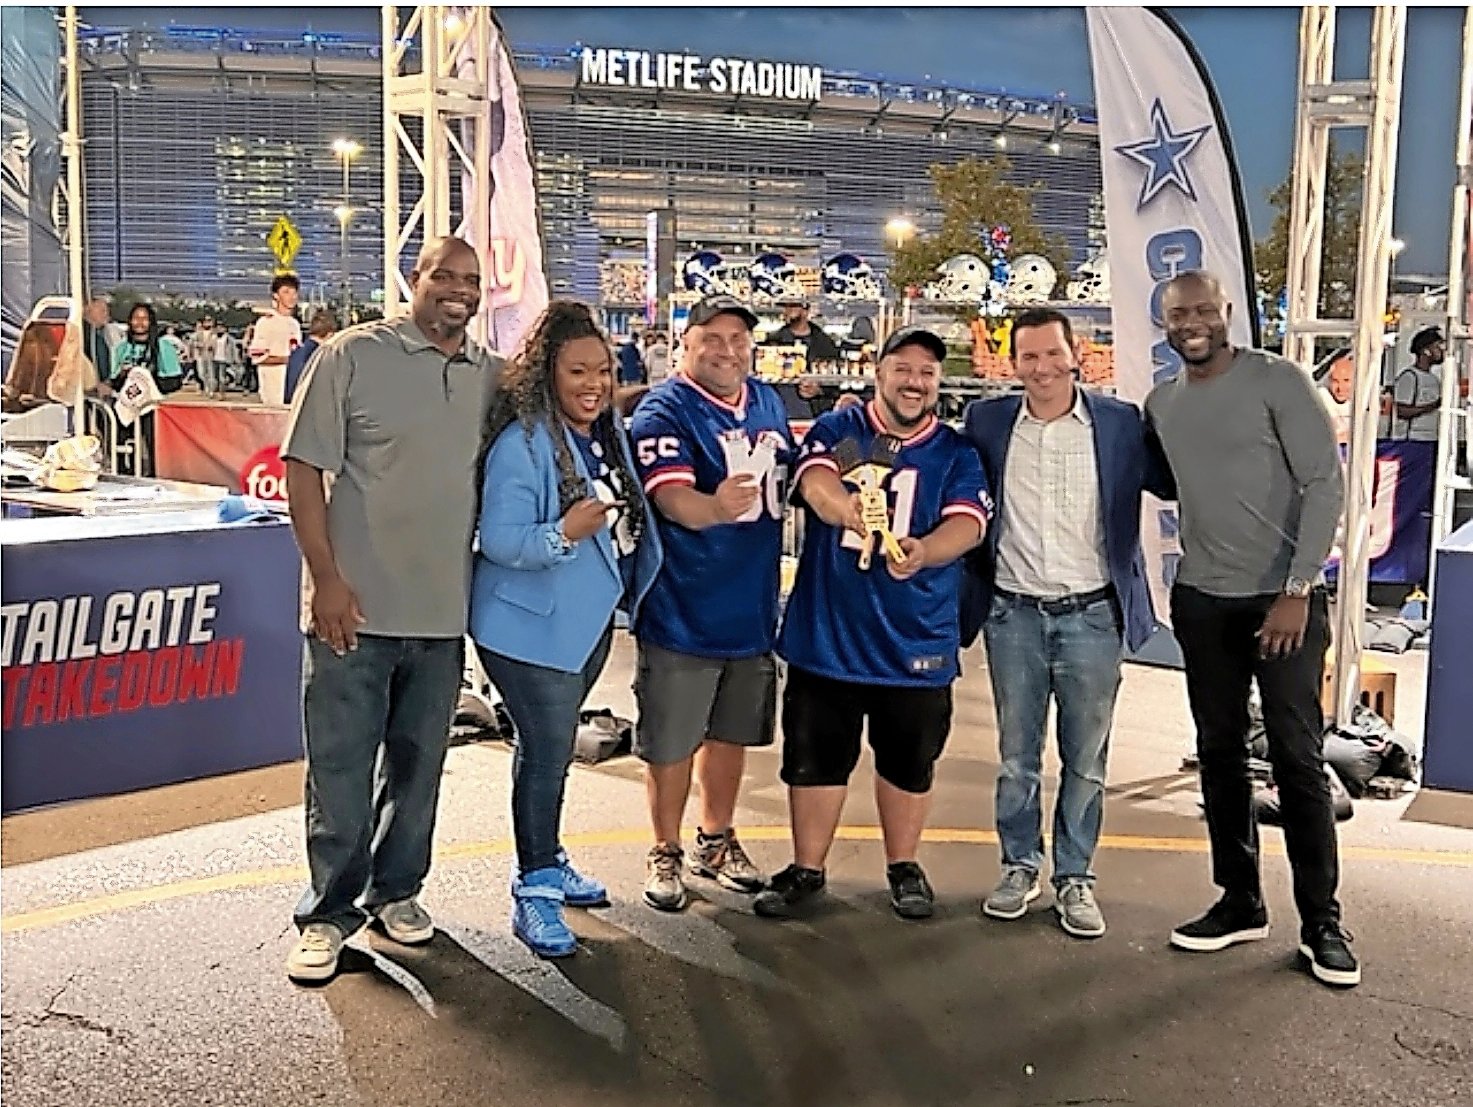 Hosts Vince Wilforkv and Sunny Anderson joined John Zozzaro and Angelo Competiello to celebrate the duo’s win. Competiello showed off the Yum-Bardi Trophy while standing alongside judges Ian Rapoport and Chef Eddie Jackson